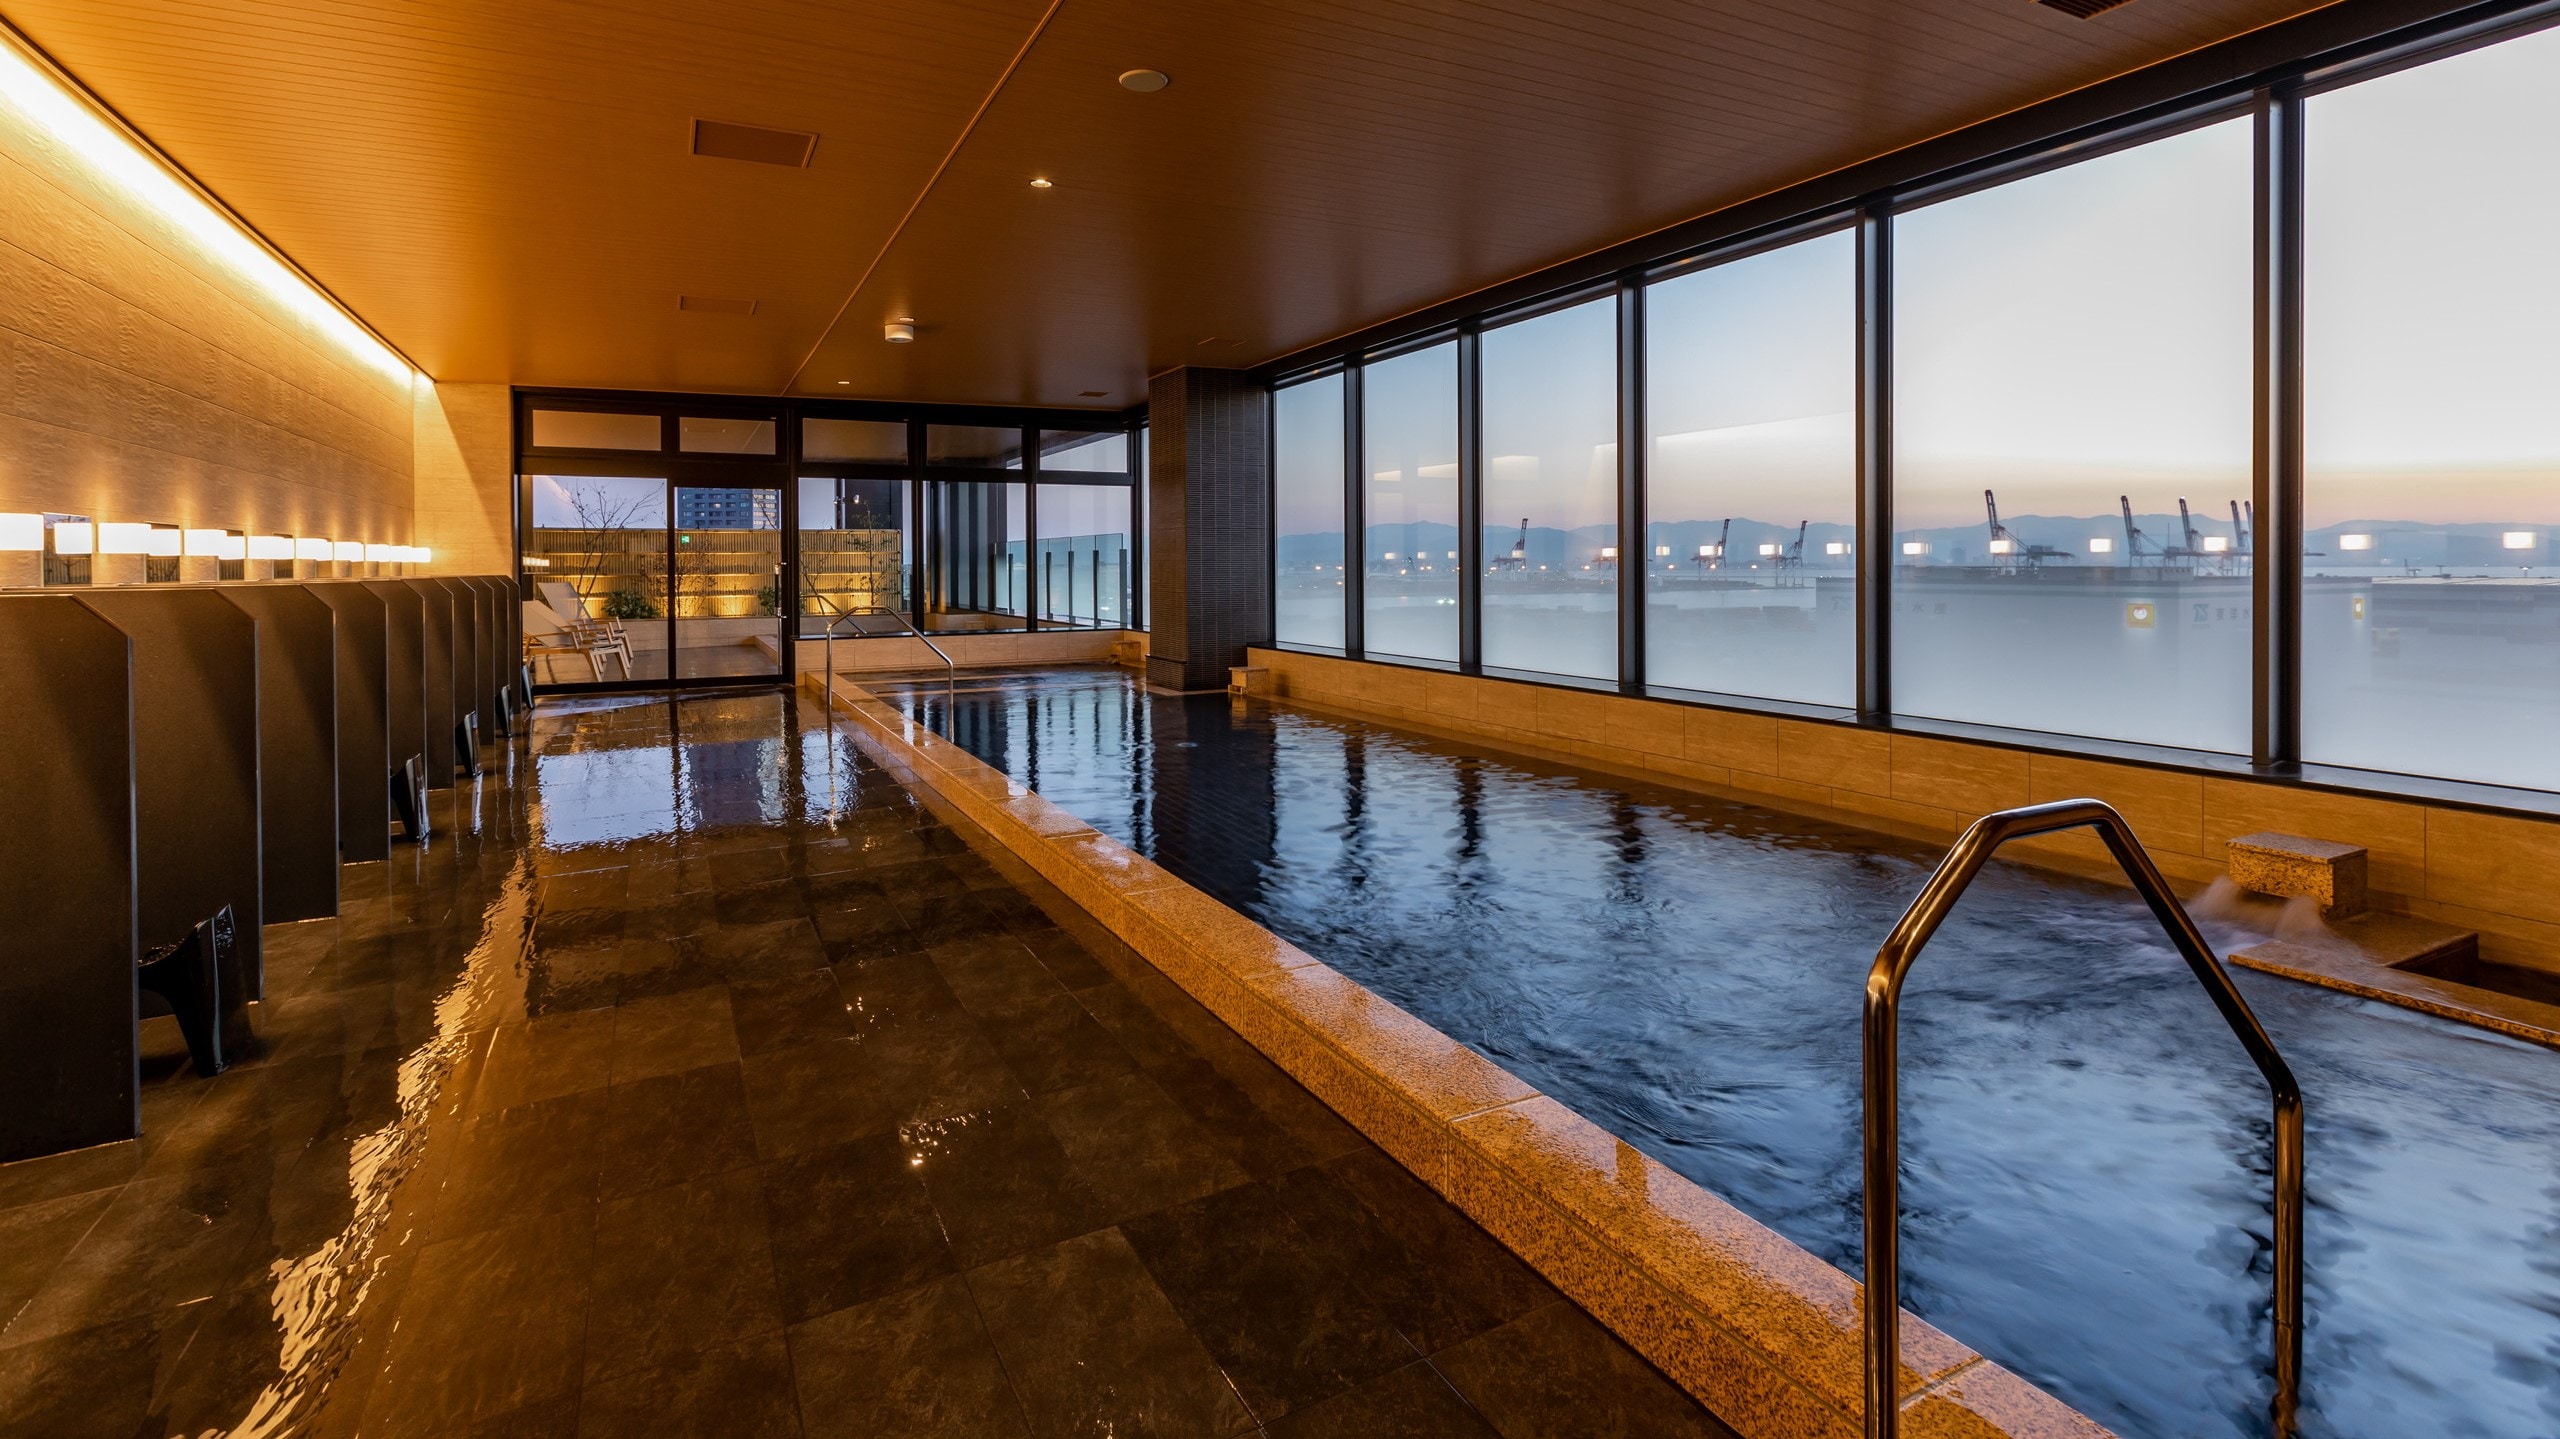 [Large public bath "Tenku -TENKU-" men's bath (10th floor)] From the open-air bath facing the west, you can see the sunset and heal your mind and body